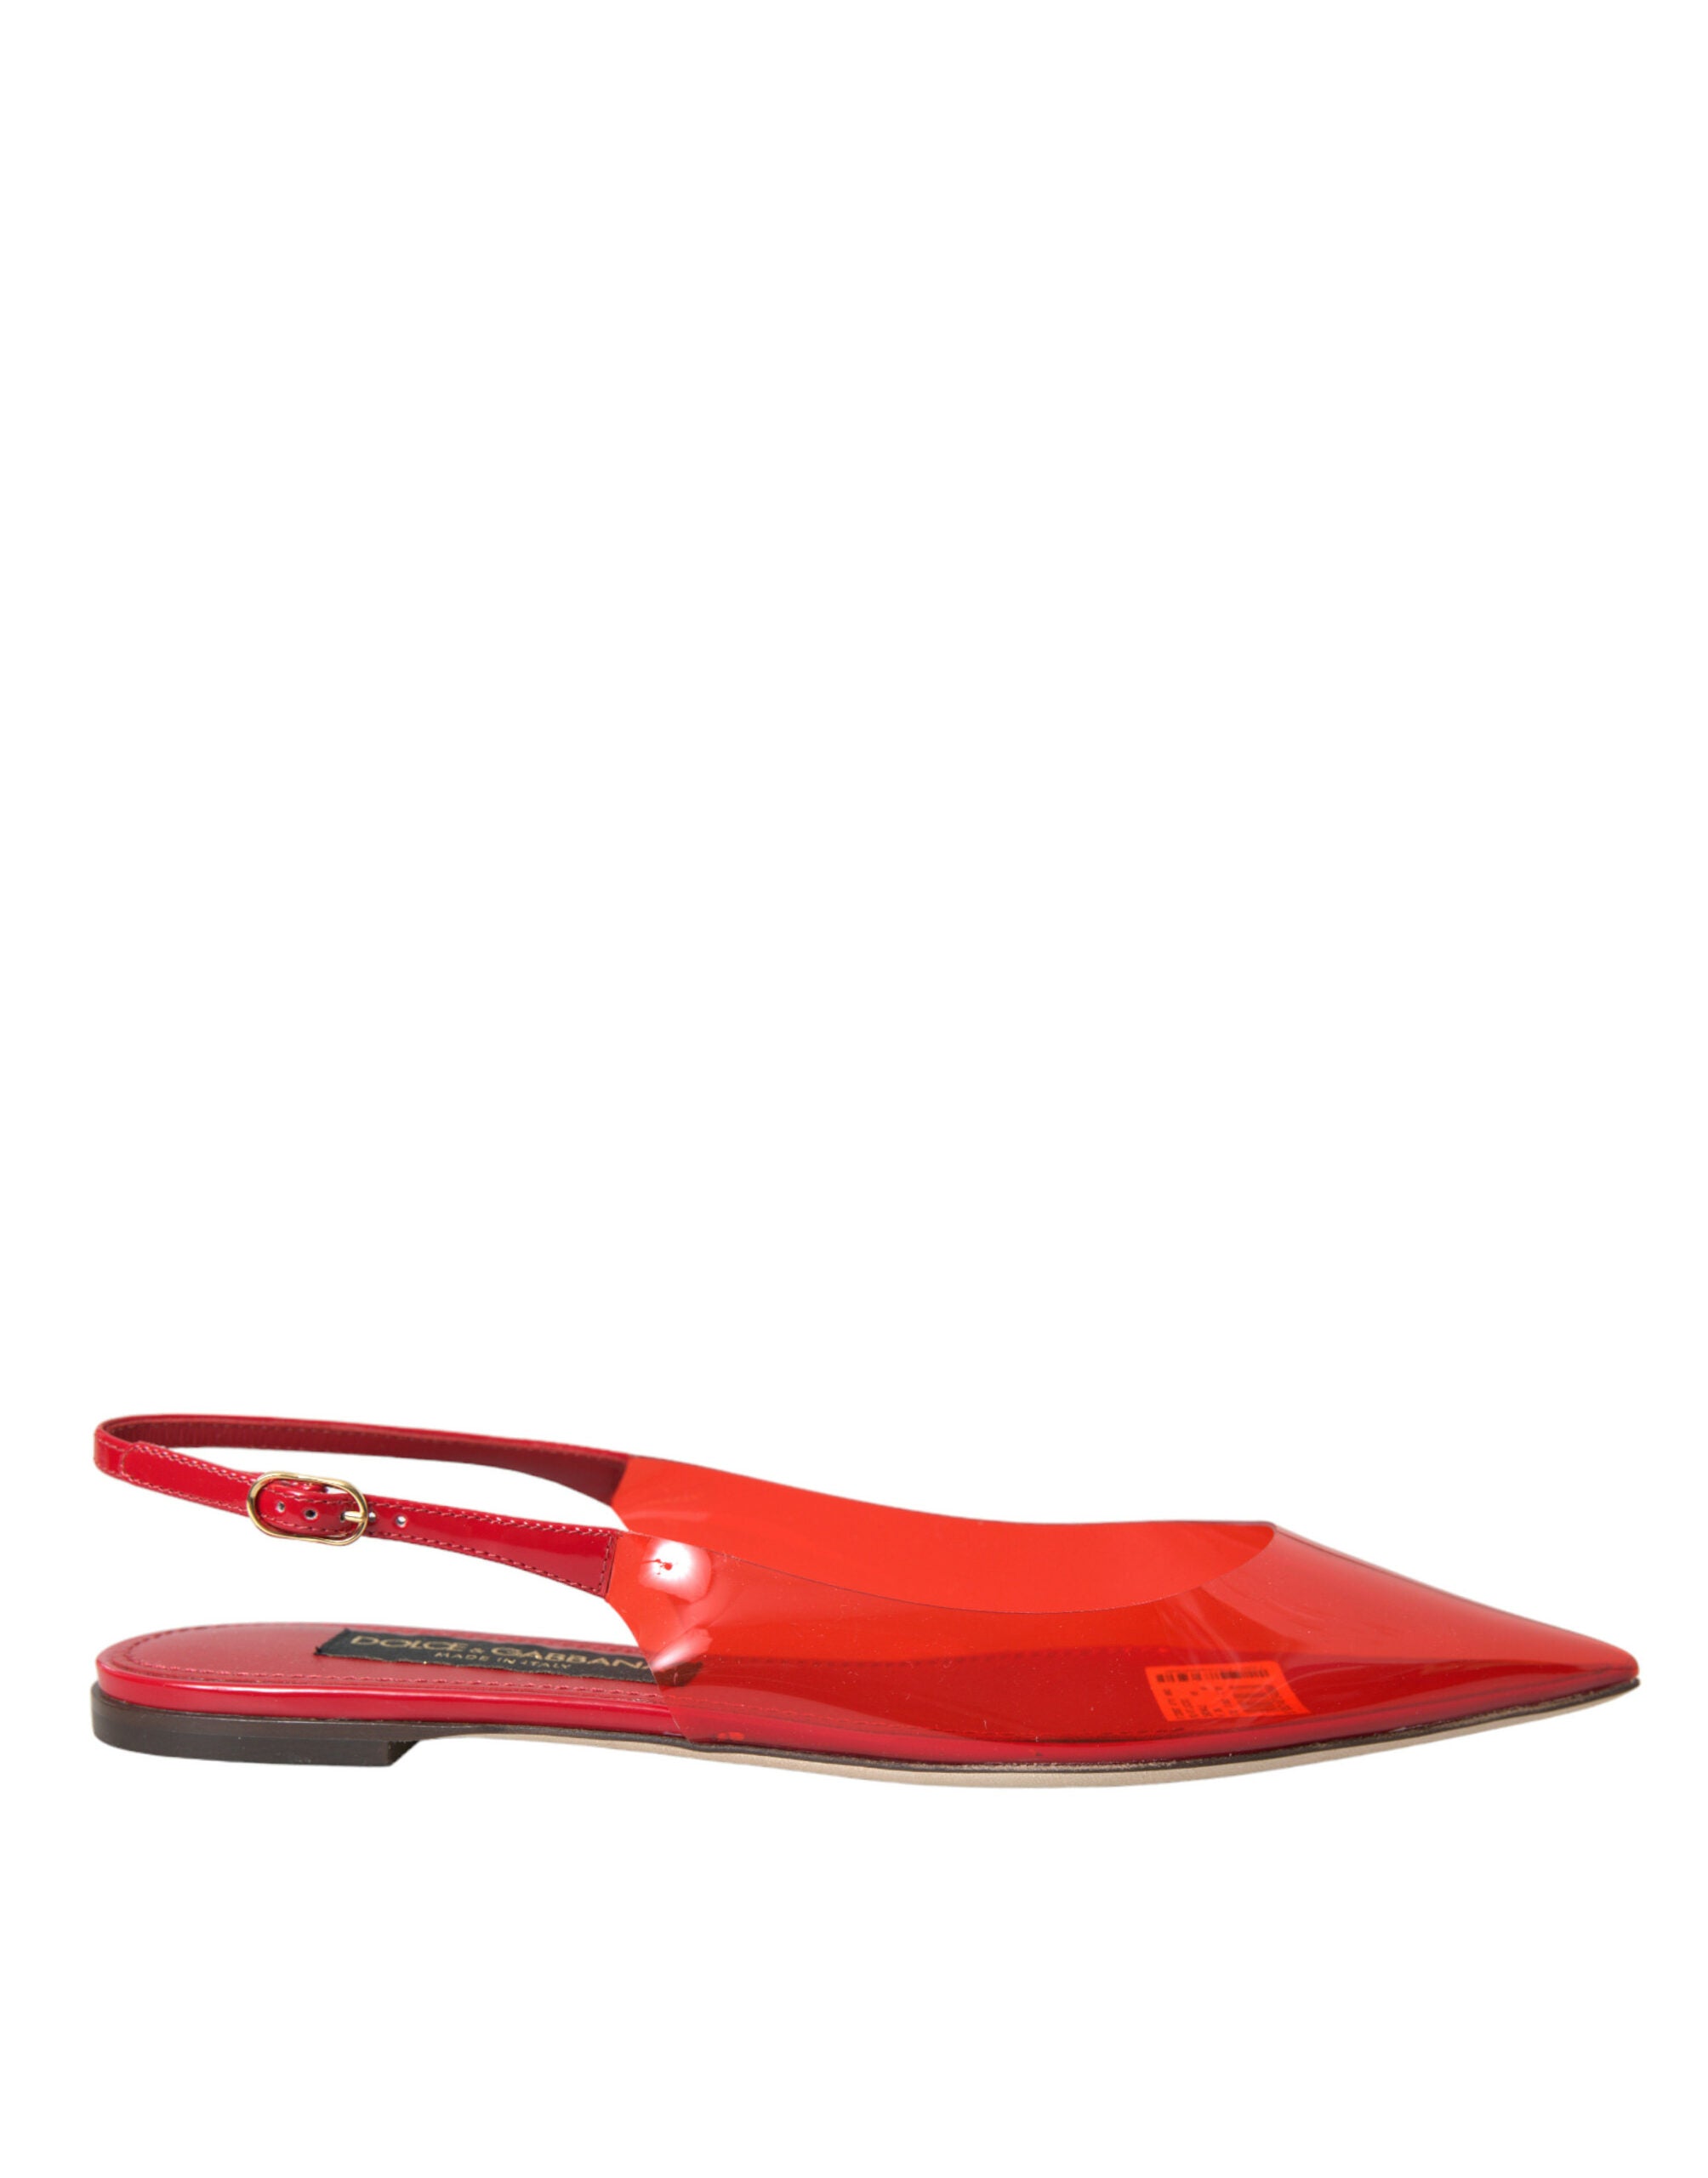 Dolce & Gabbana Red Pvc Slingback Clear Flats Sandals Shoes